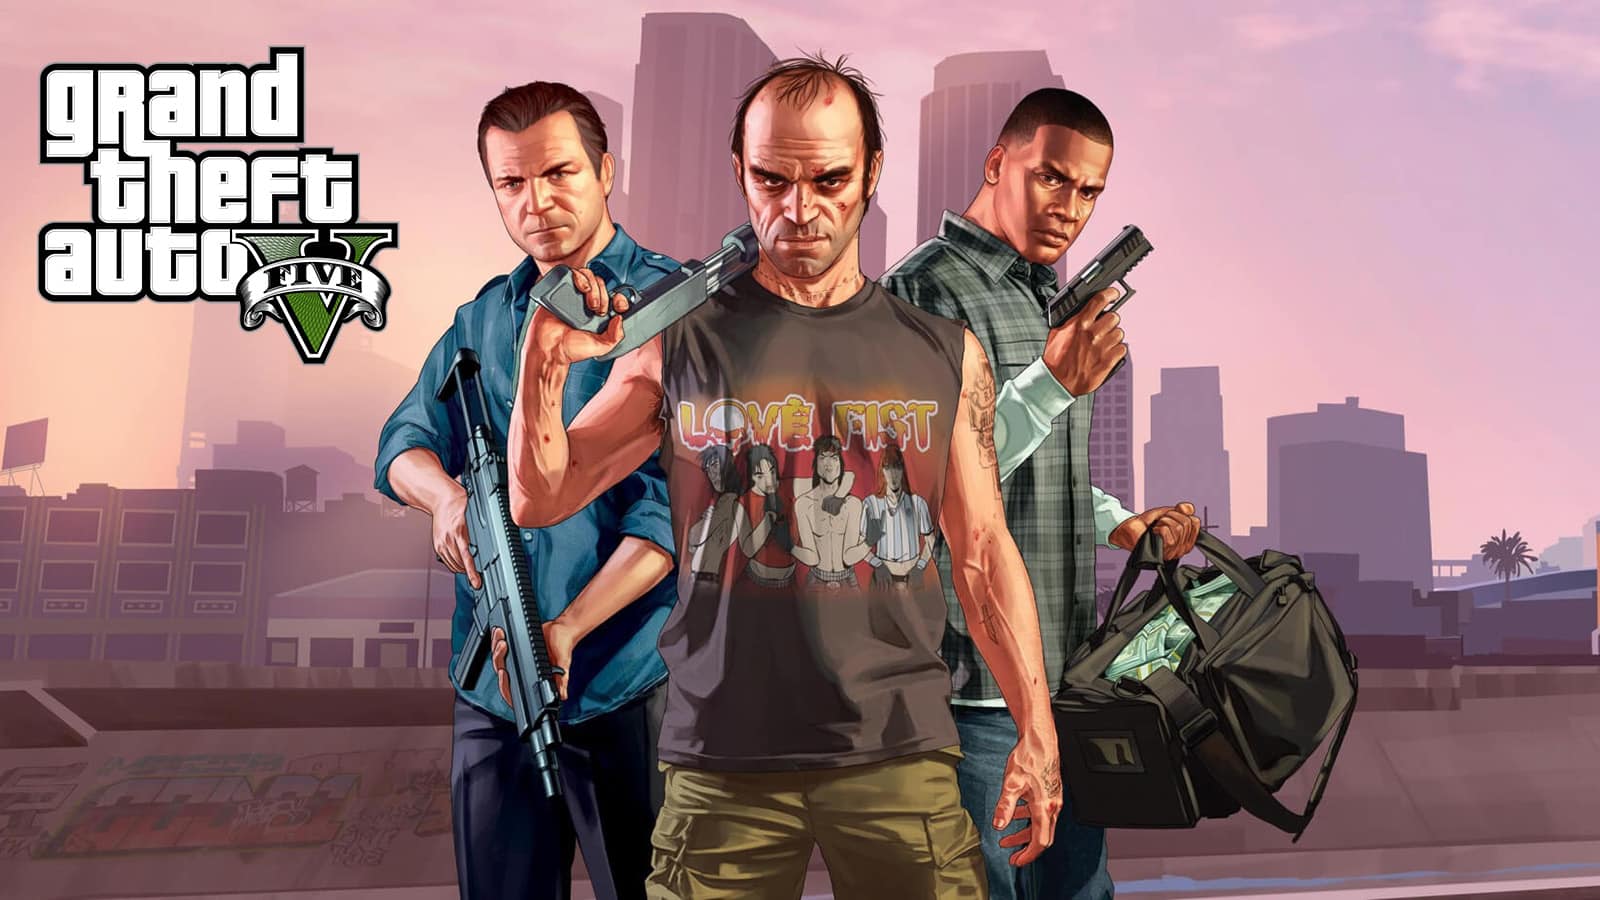 GTA Online 5 PS4, Xbox One, PC Updates: Mods for PC 'Grand Theft Auto V'  Likely to Come After Release Date; Redditor Posts His Vision of 'CJ